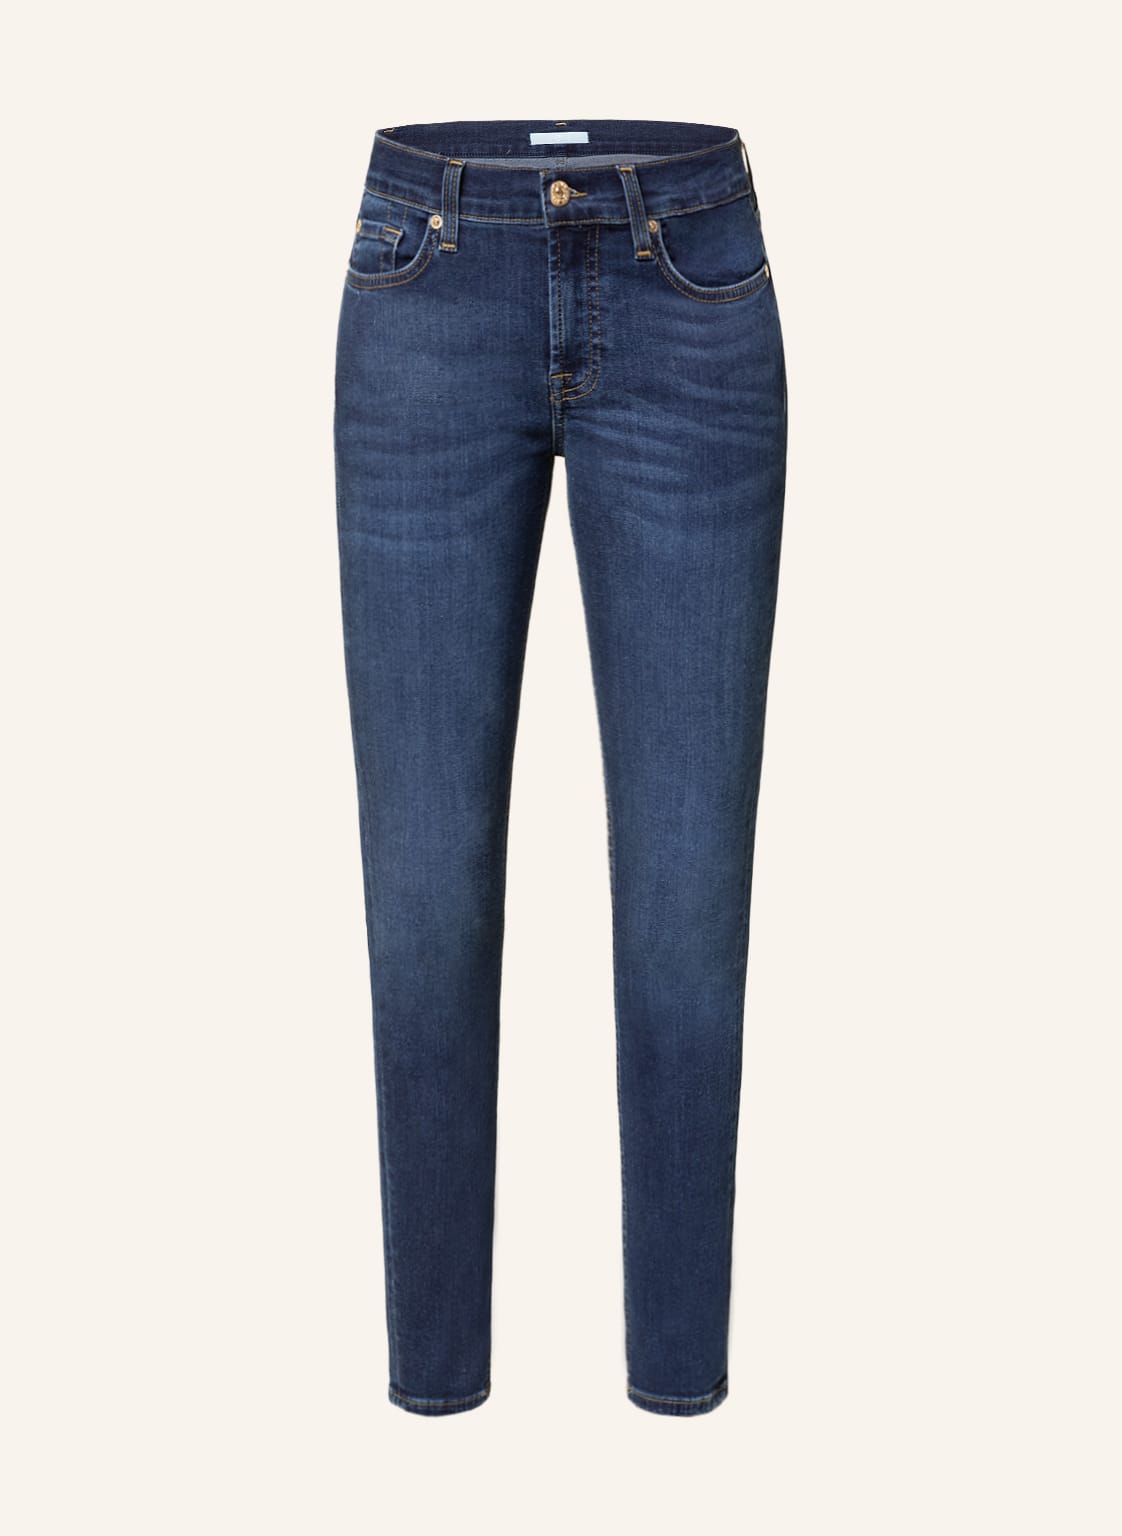 7 For All Mankind 7/8-Jeans The Ankle Skinny blau von 7 For All Mankind